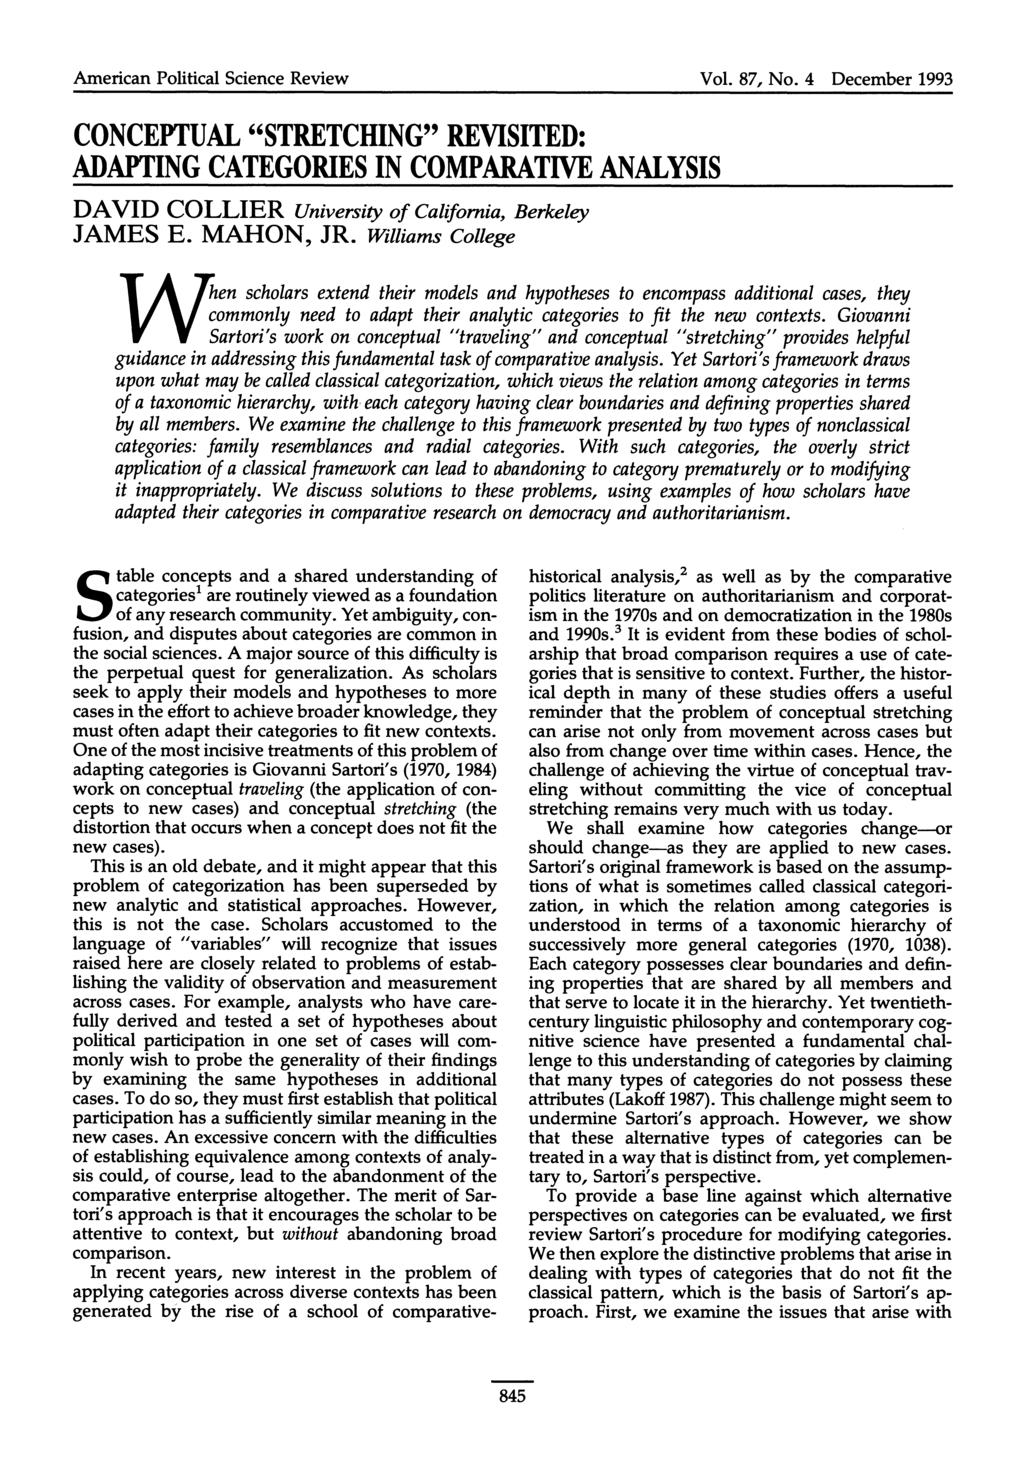 American Political Science Review Vol. 87, No. 4 December 1993 CONCEPTUAL "STRETCHING" REVISITED: ADAPTING CATEGORIES IN COMPARATIVE ANALYSIS DAVID COLLIER University of California, Berkeley JAMES E.